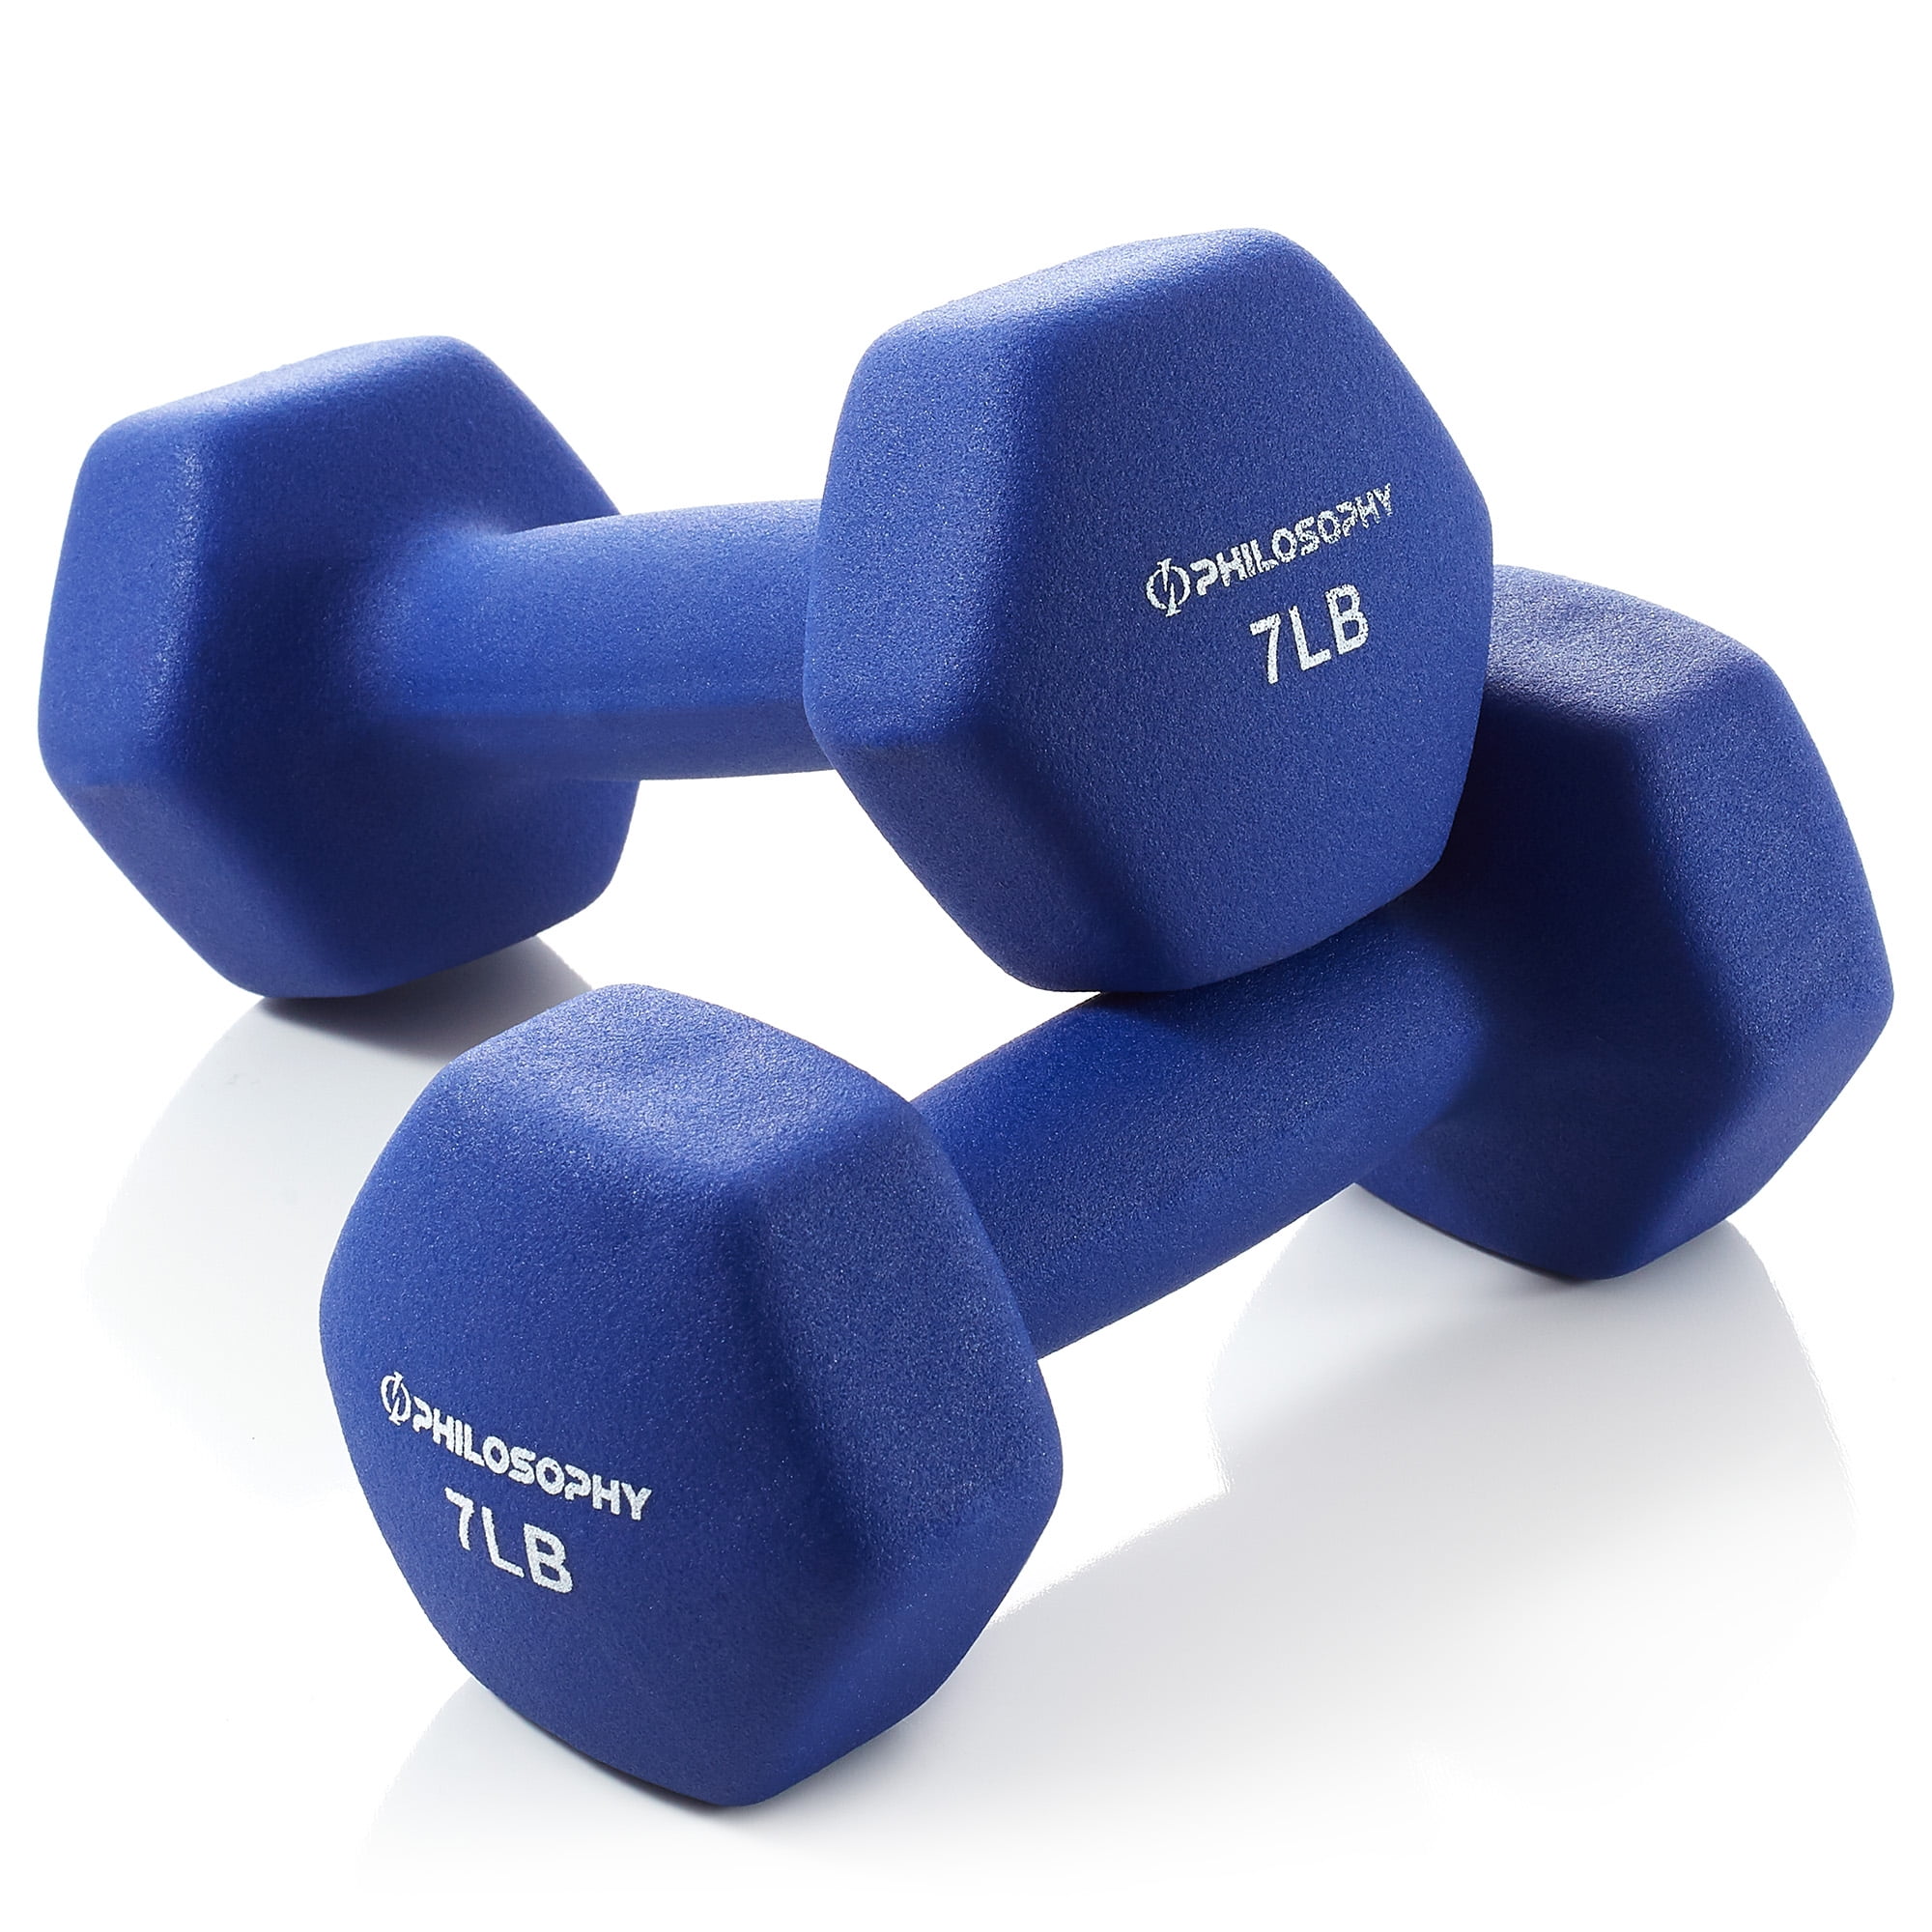 46 LBS TOTAL 8 lb & 5 lb Pairs NEW CAP Neoprene Dumbbell Weights Set of 10 lb